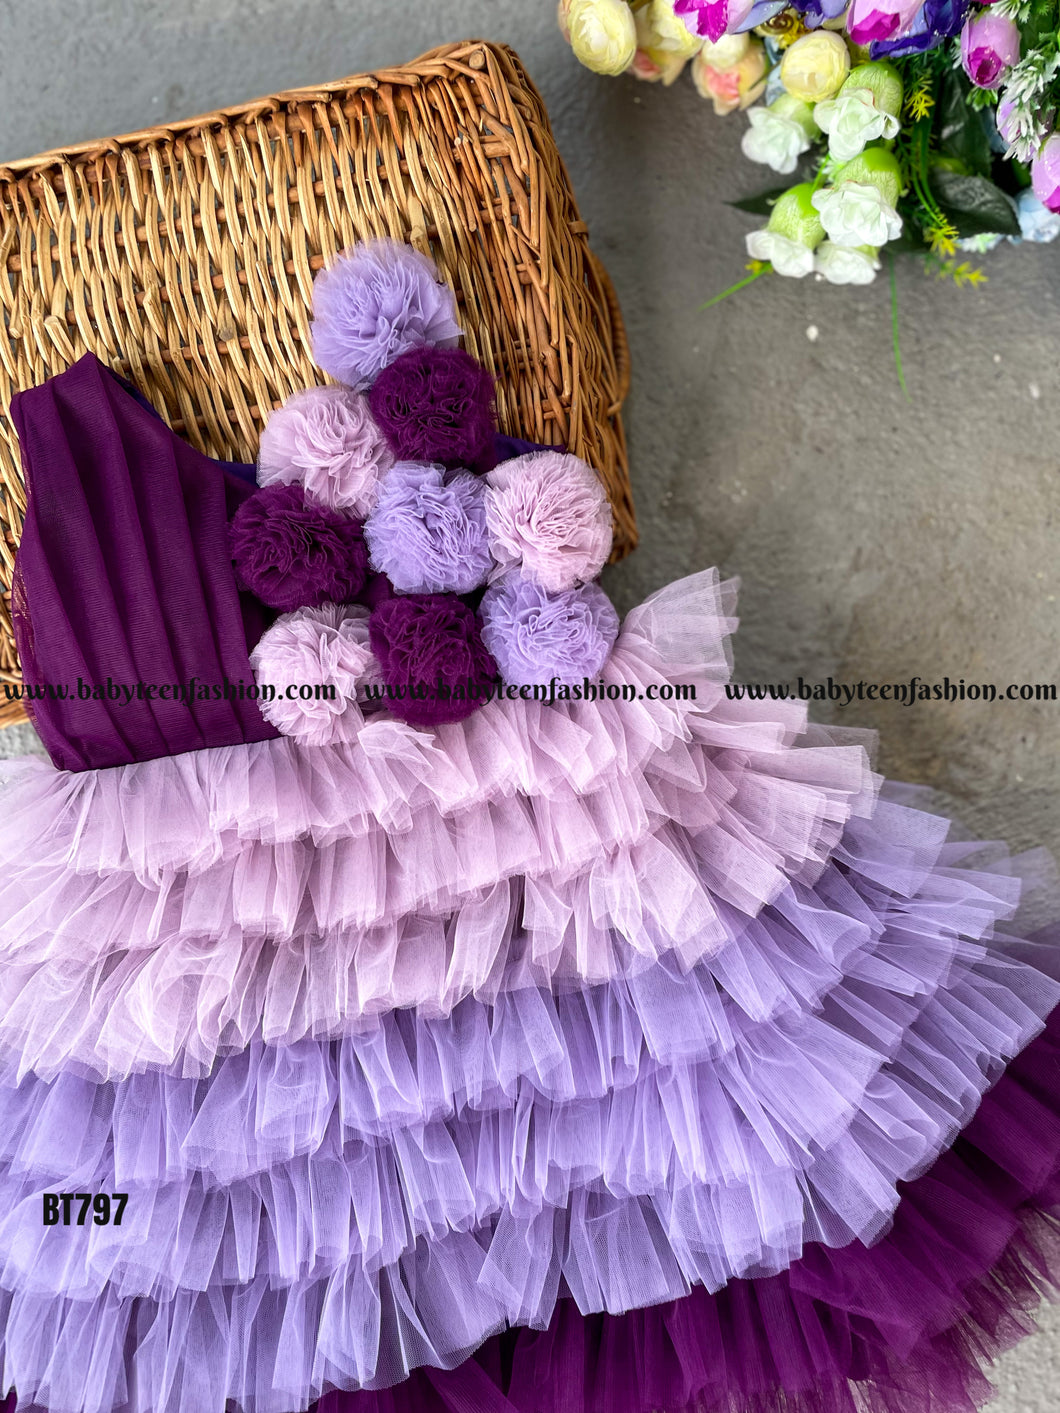 BT797 Flowers Embossed Multilayered Sleeveless Birthday Frock  in Shades of Purple